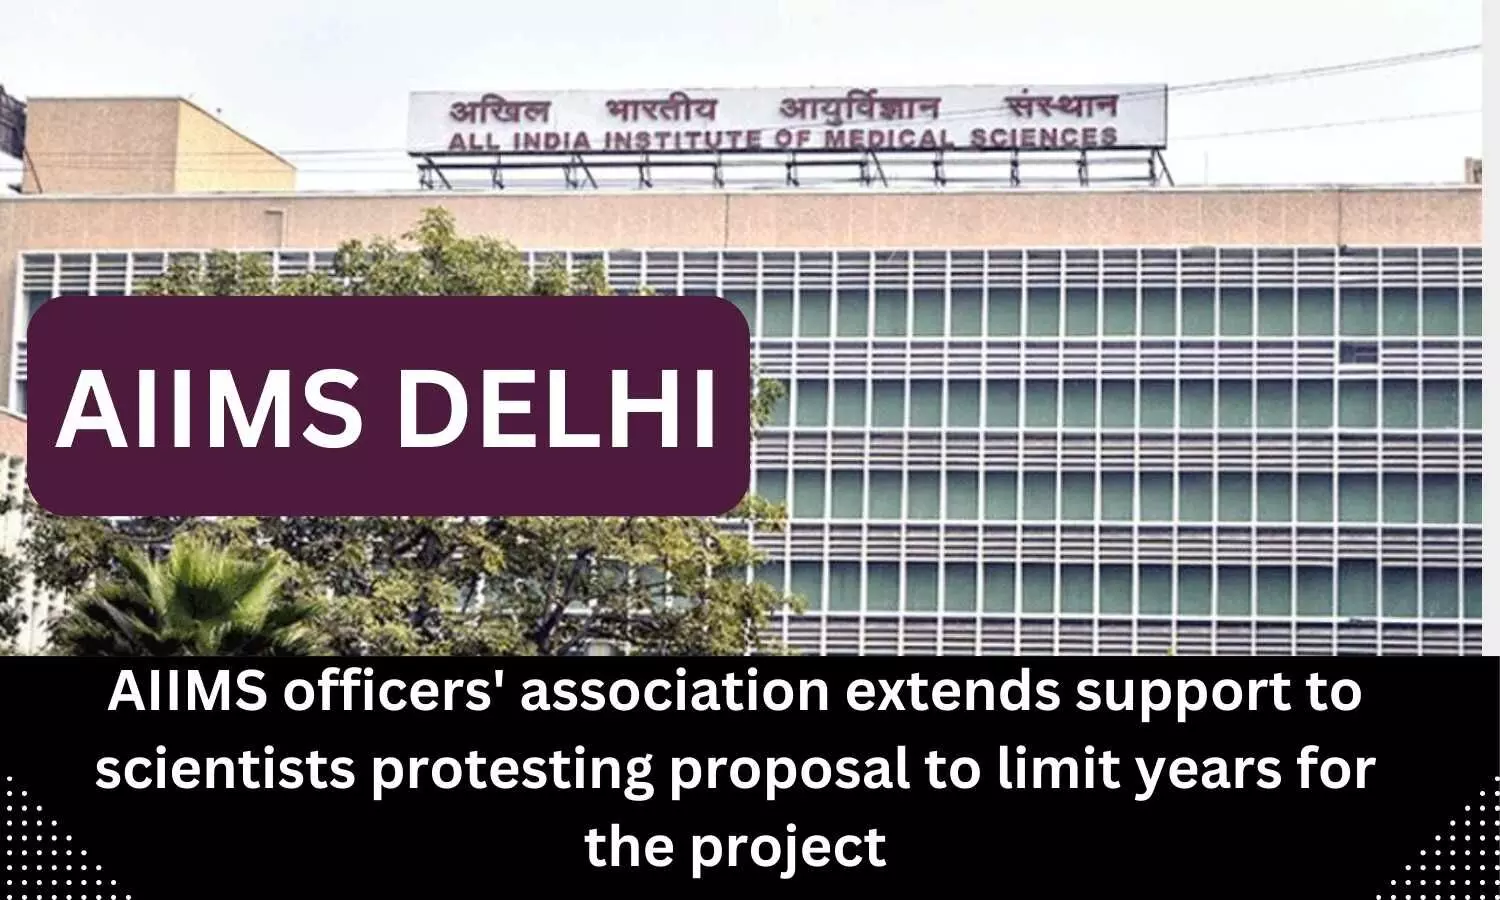 Scientists protesting proposal to limit years for project, AIIMS officers association extends support